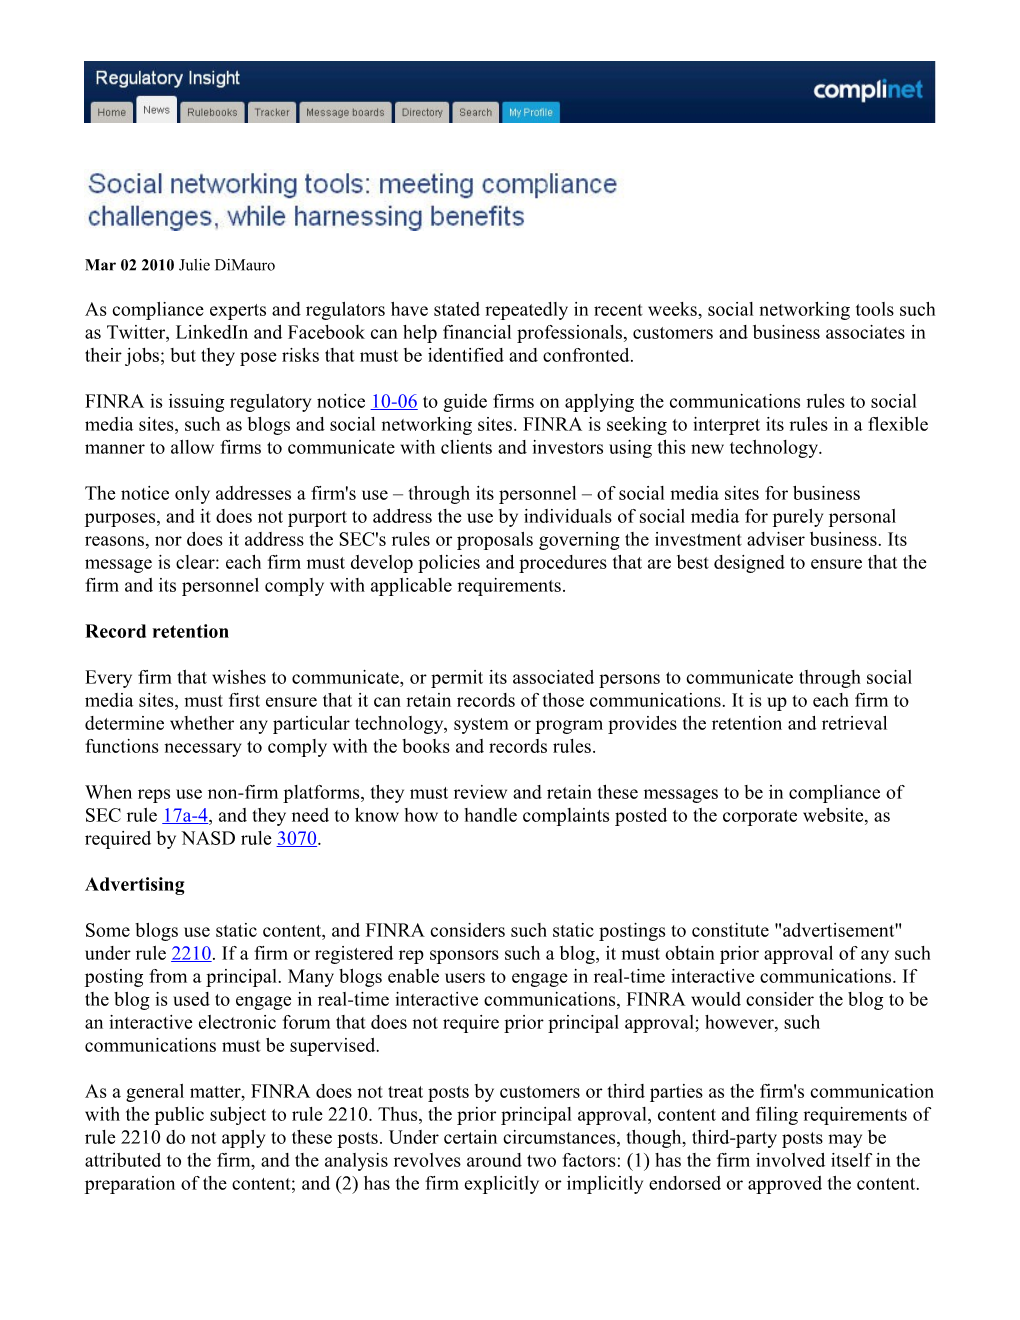 As Compliance Experts and Regulators Have Stated Repeatedly in Recent Weeks, Social Networking